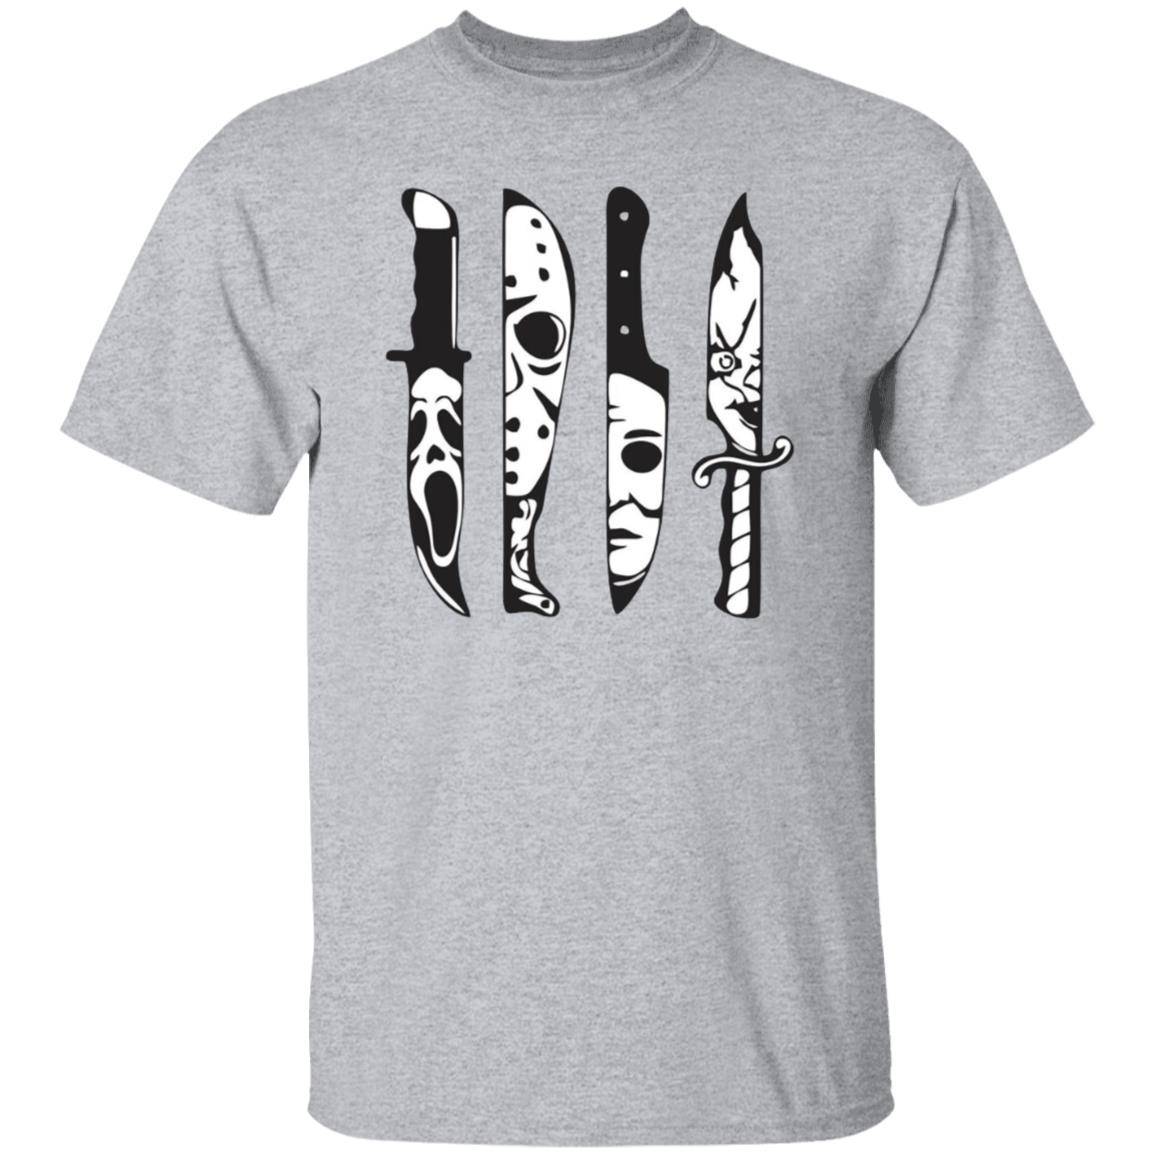 Sport gray unisex Halloween t-shirt with four knives across the front showing killer faces from famous horror movies in the reflection (Ghostface, Jason Voorhees, Michael Myers and Chucky). 